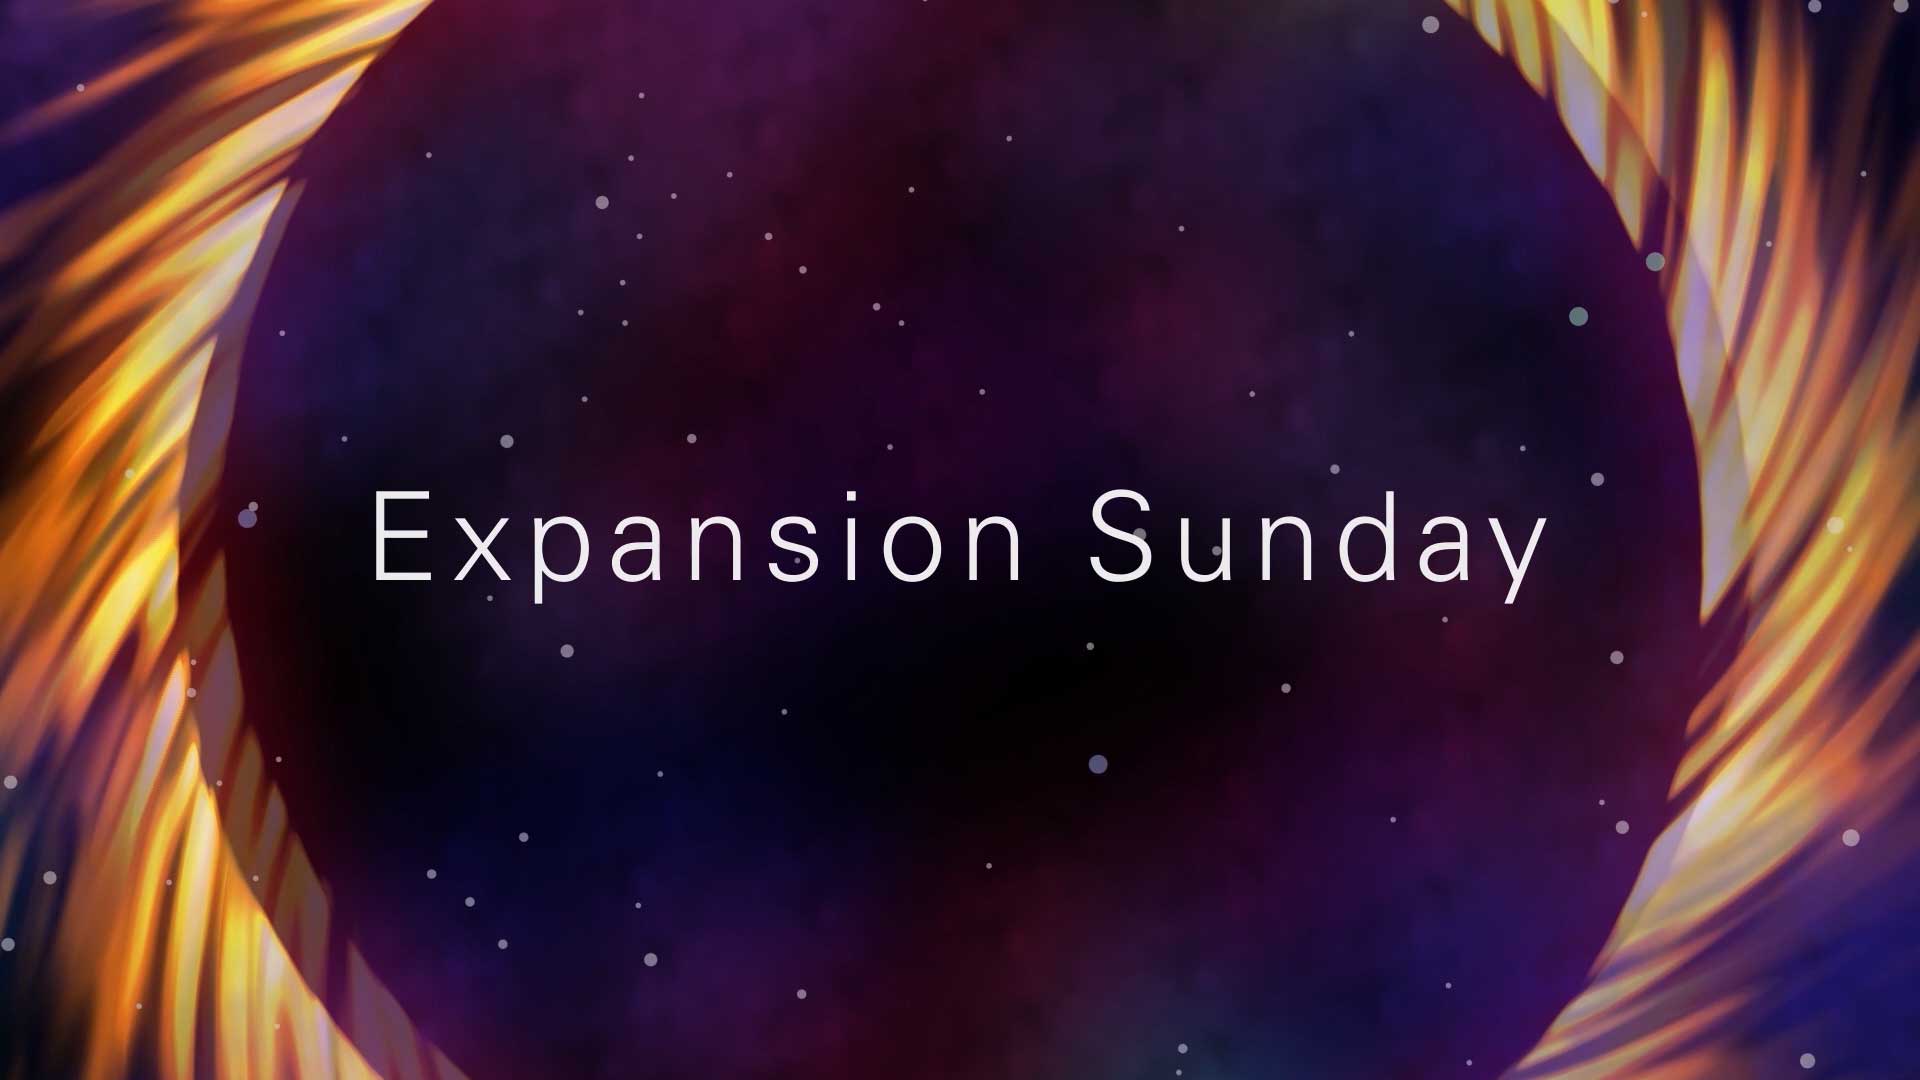 expansion-sunday | Expand with Julius and Xpnsion Network